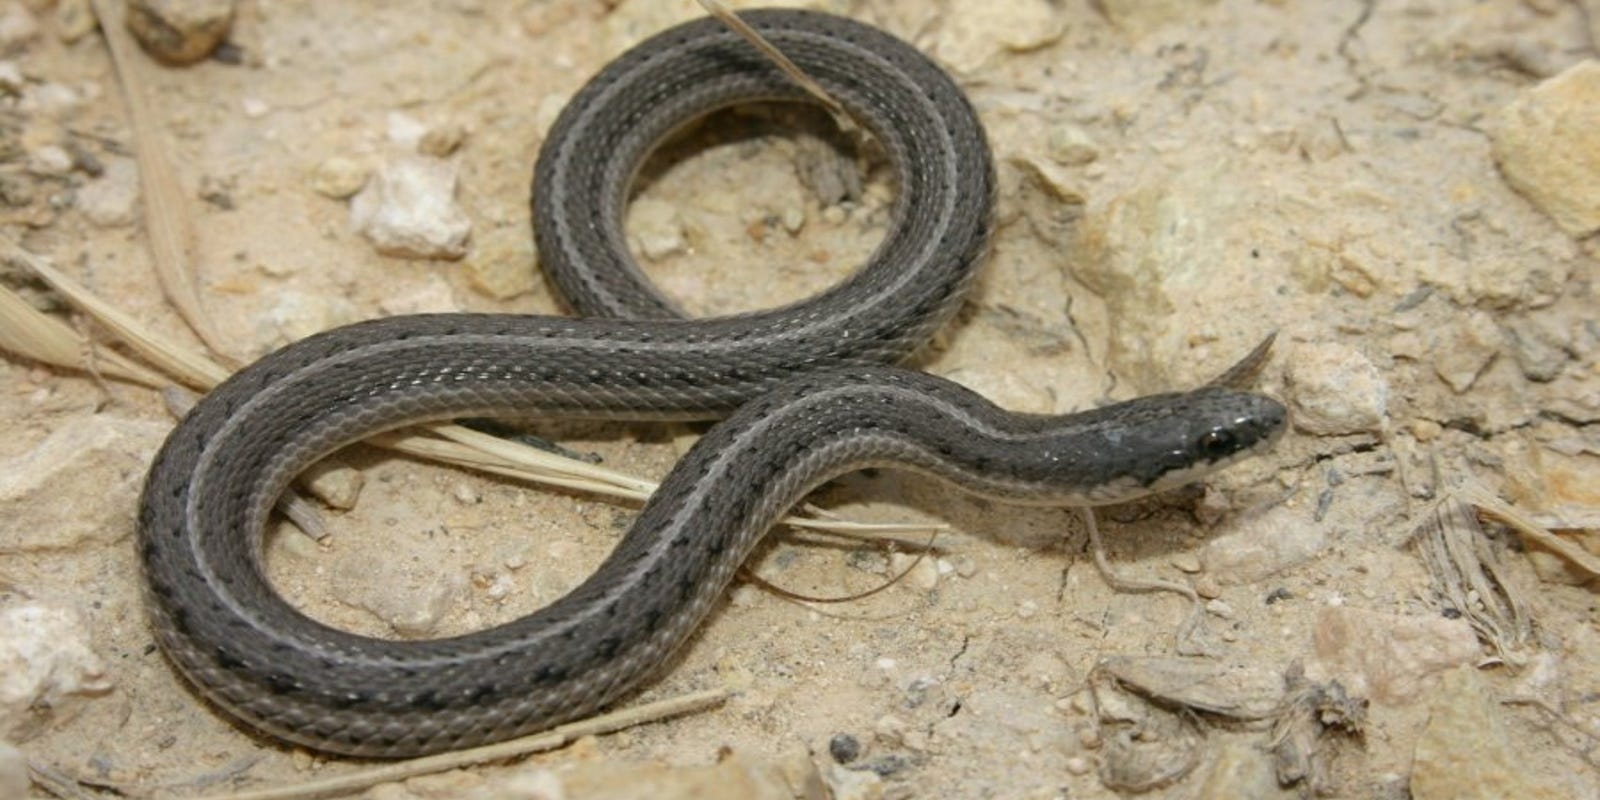 Wild About Texas Texas Lined Snake Is A Garden Variety